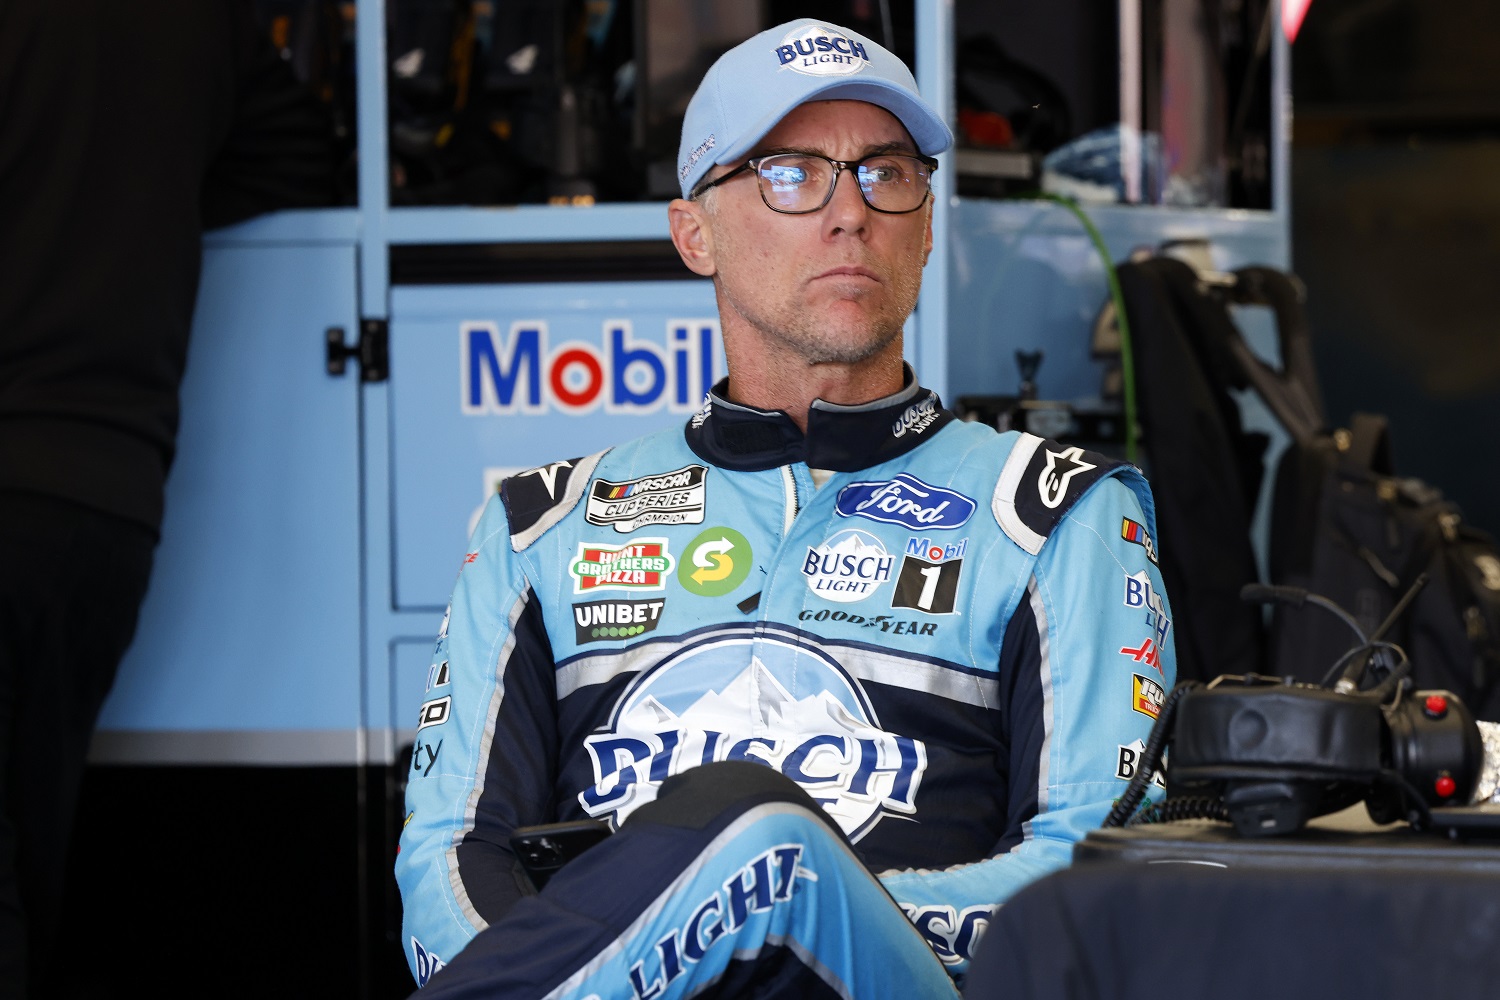 Kevin Harvick waits in the garage area during  NASCAR Cup Series Next Gen testing at Charlotte Motor Speedway on Nov. 17, 2021, in Concord, North Carolina. | Grant Halverson/Getty Images